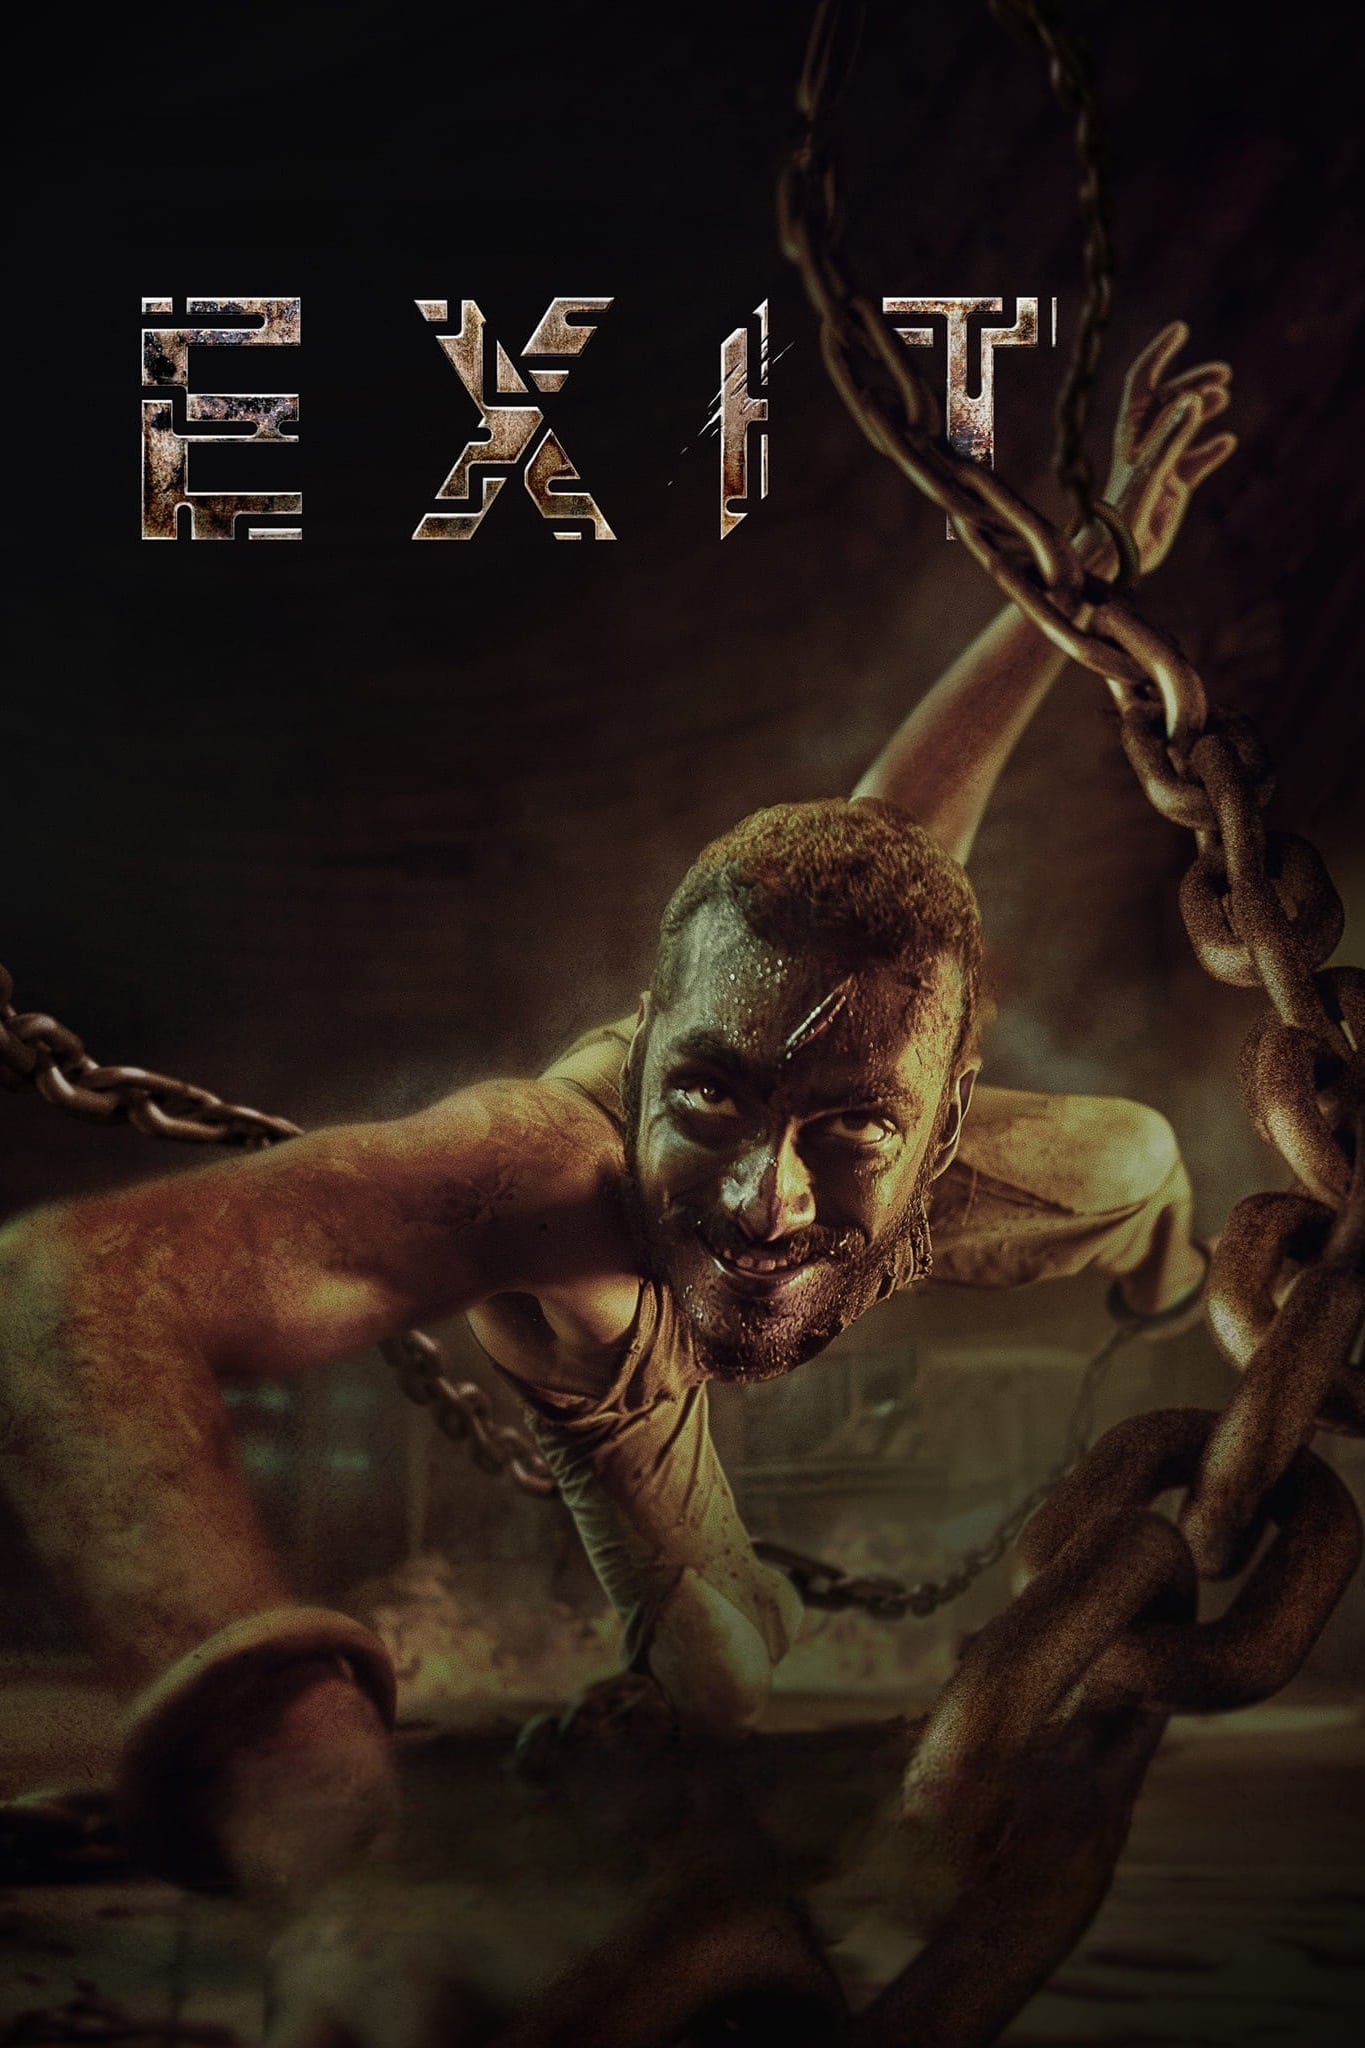 Poster for the movie "Exit"